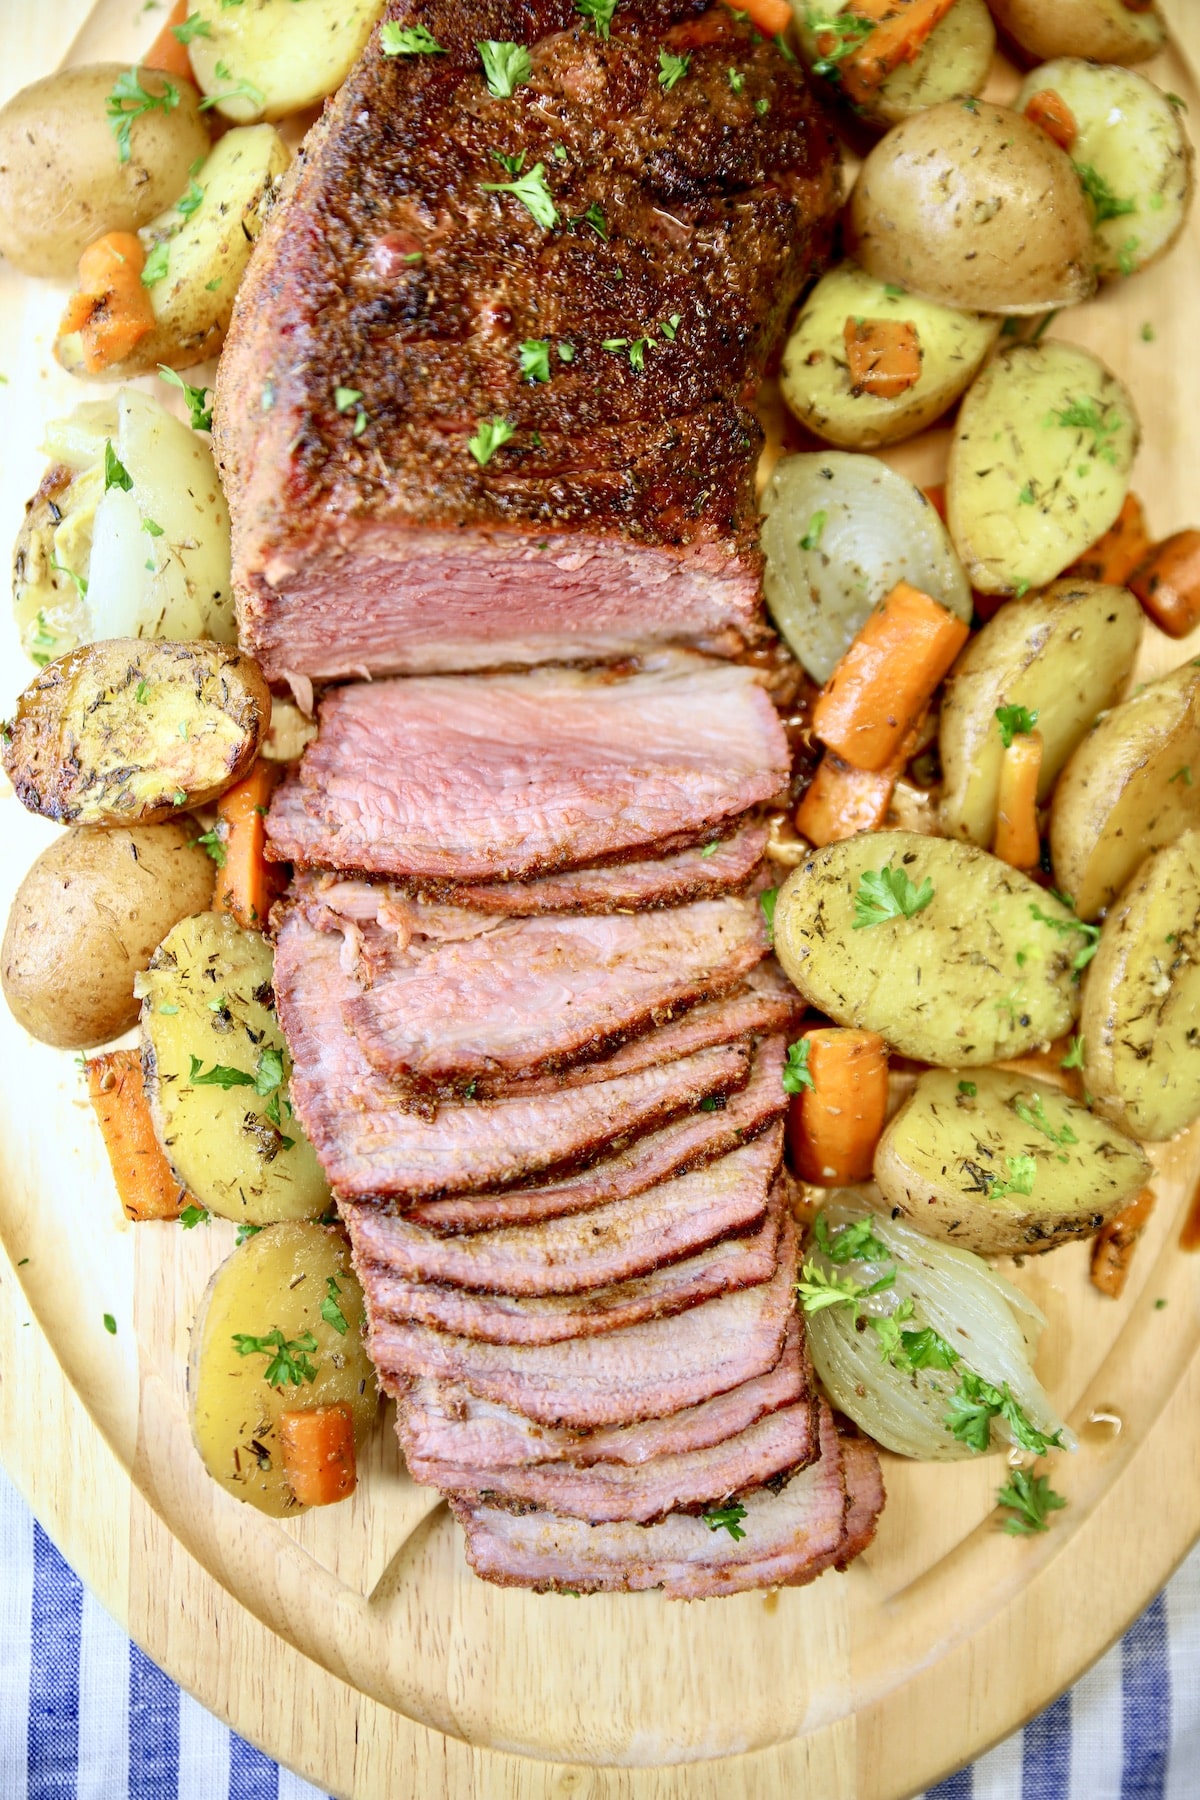 Cutting board with sliced roast beef and vegetables.